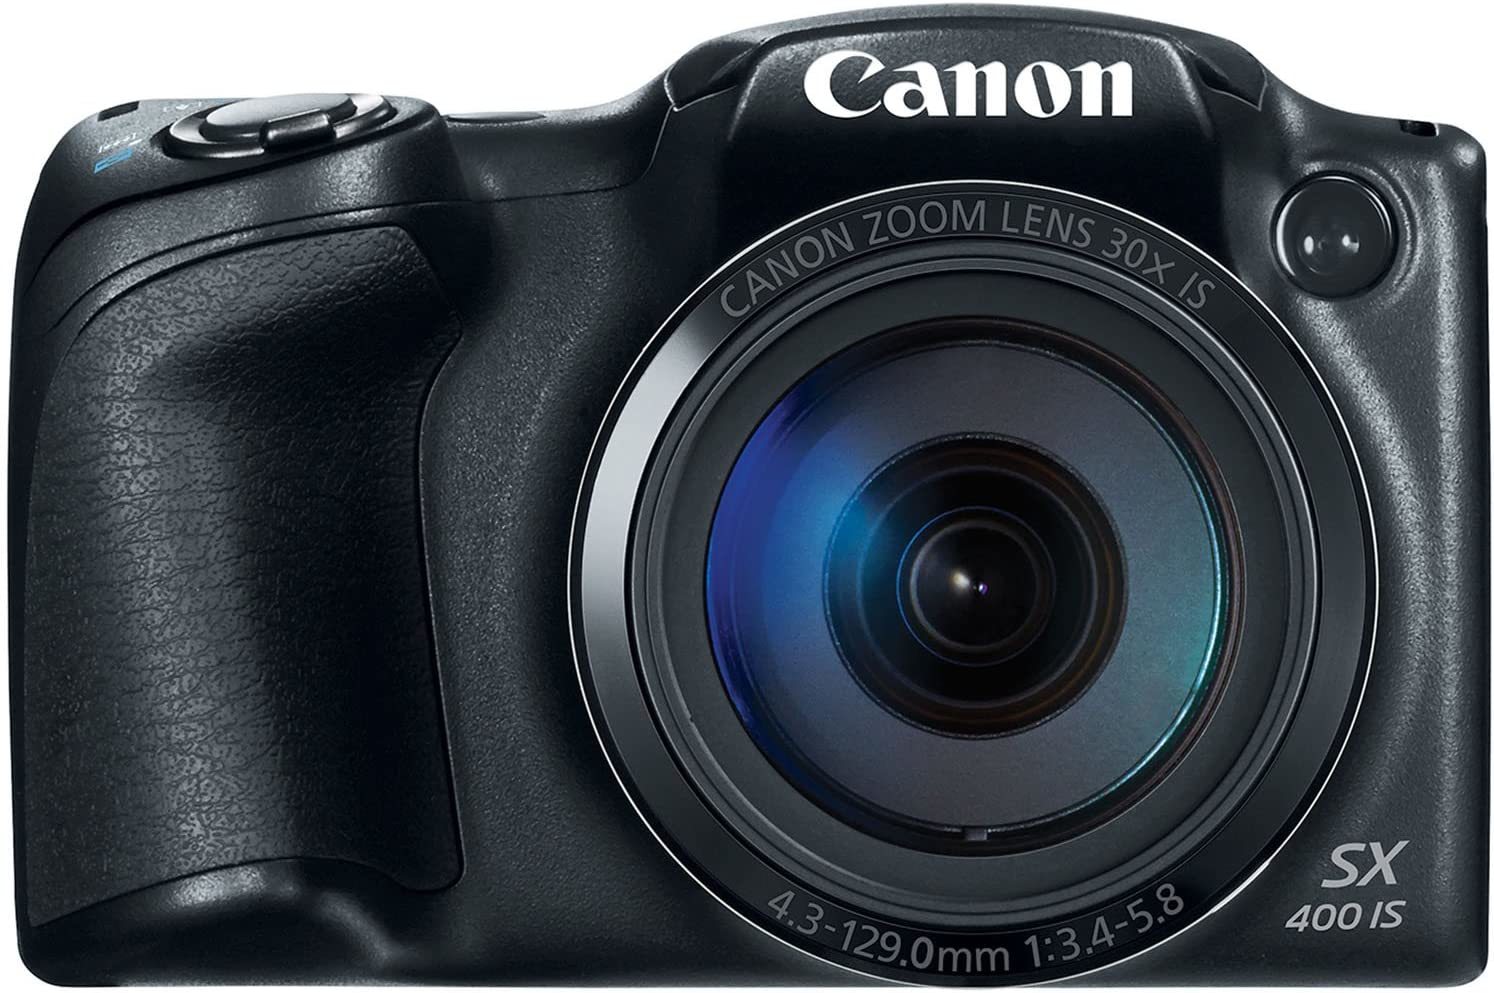 Canon Powershot Sx400 Digital Camera With 30X Optical Zoom (Black) (Manufacturer - $245.95